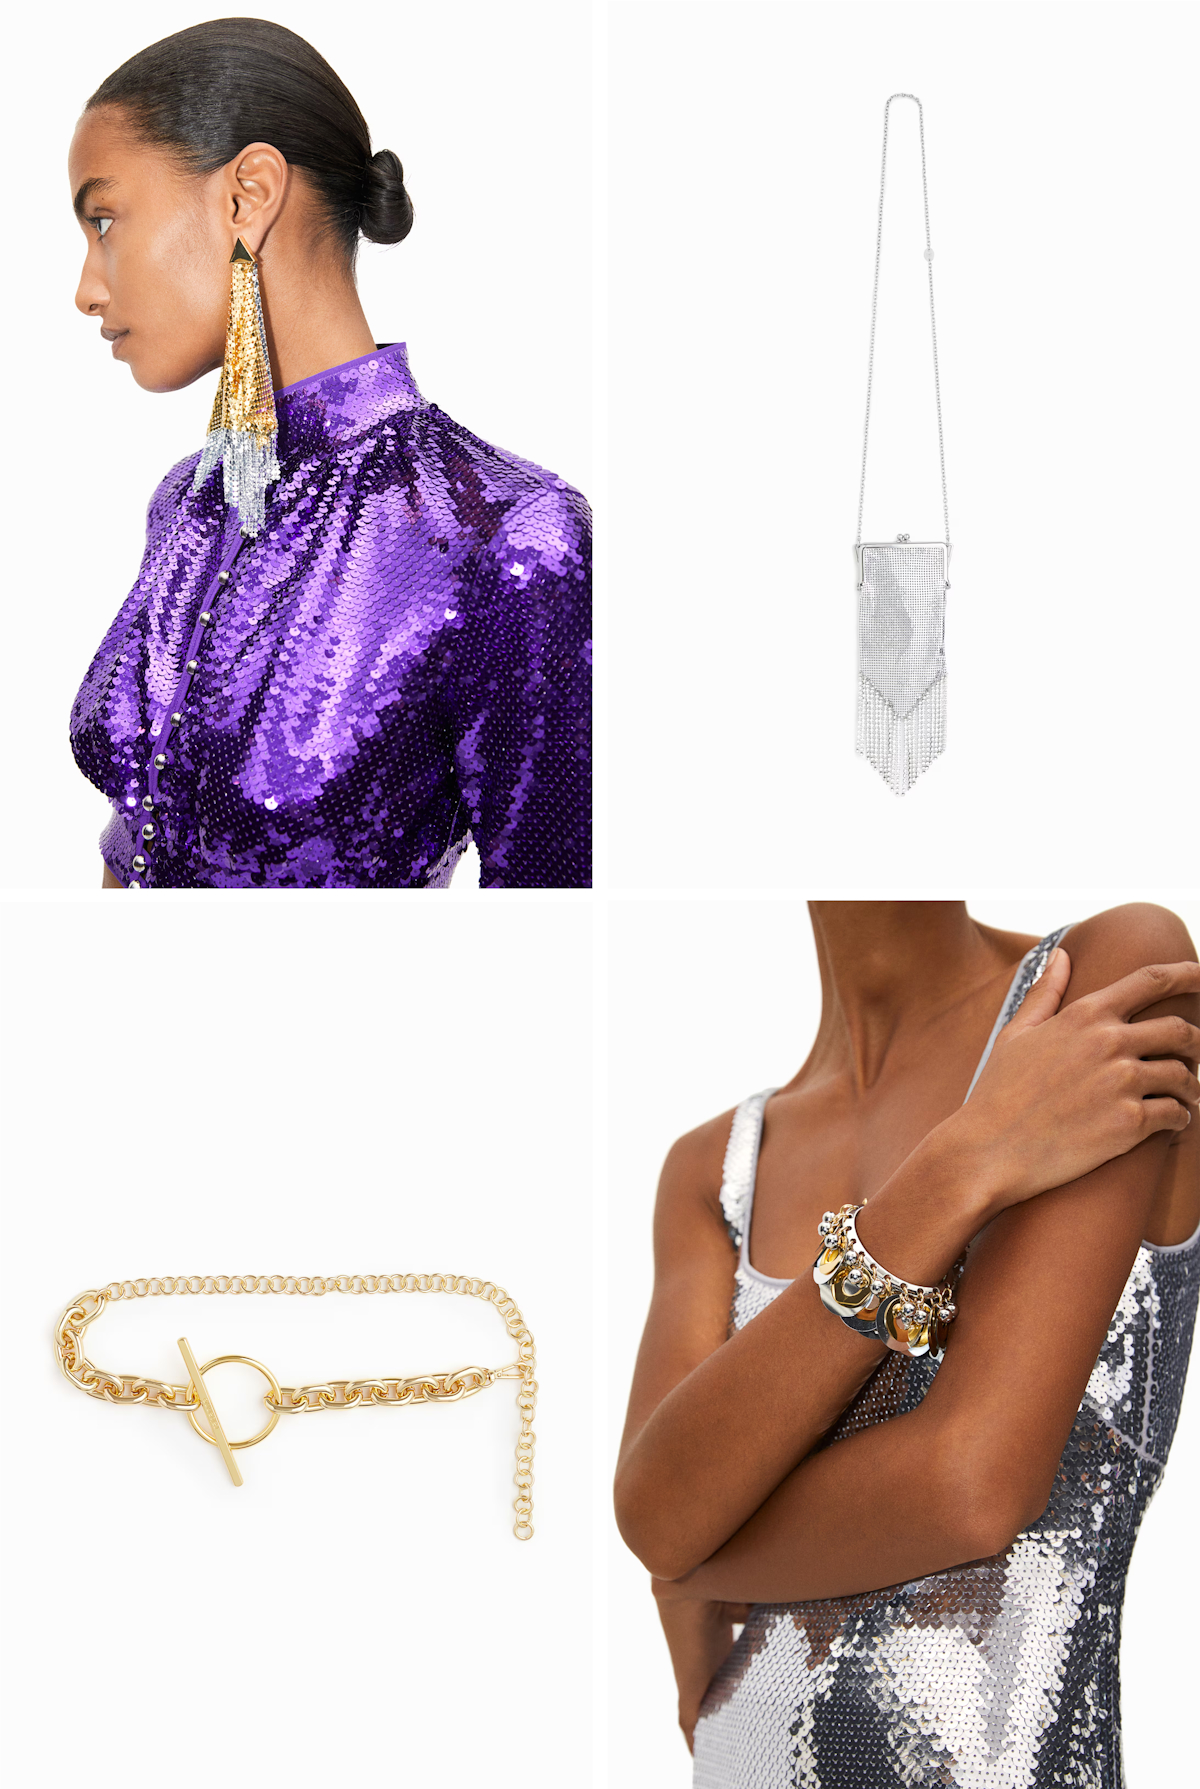 Here's theFashionSpot's Top Picks from the Rabanne x H&M Collection